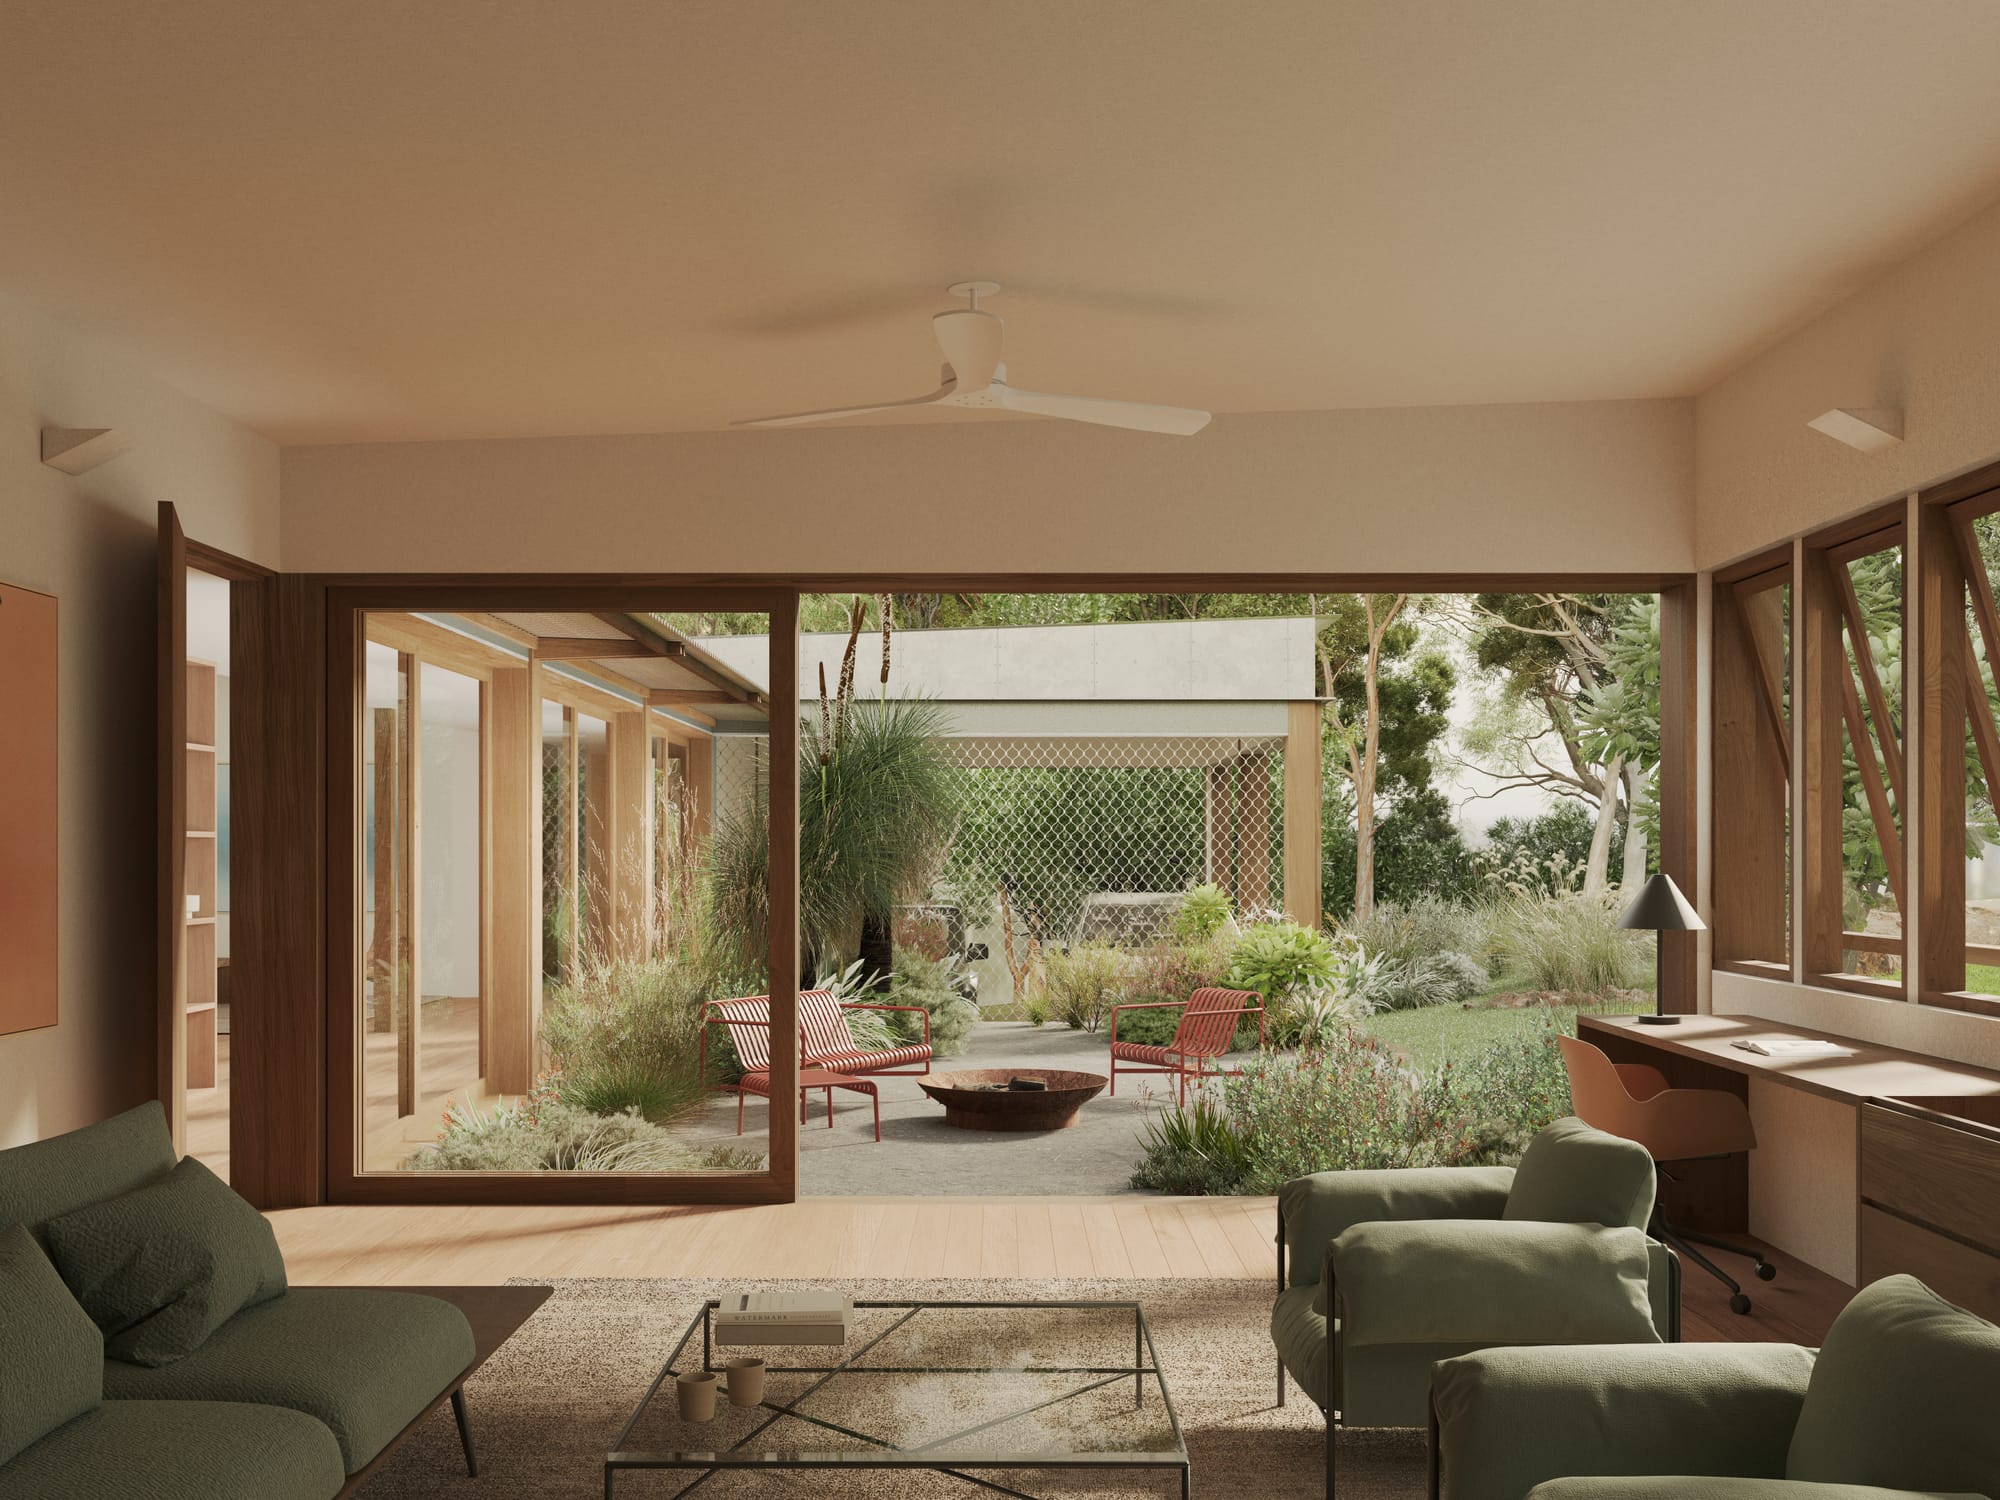 Mulloway House. Renders copyright of CHOIRENDER. Living space with green couches and arm chairs. Full length sliding timber framed doors open onto courtyard with firepit and red outdoor furniture.